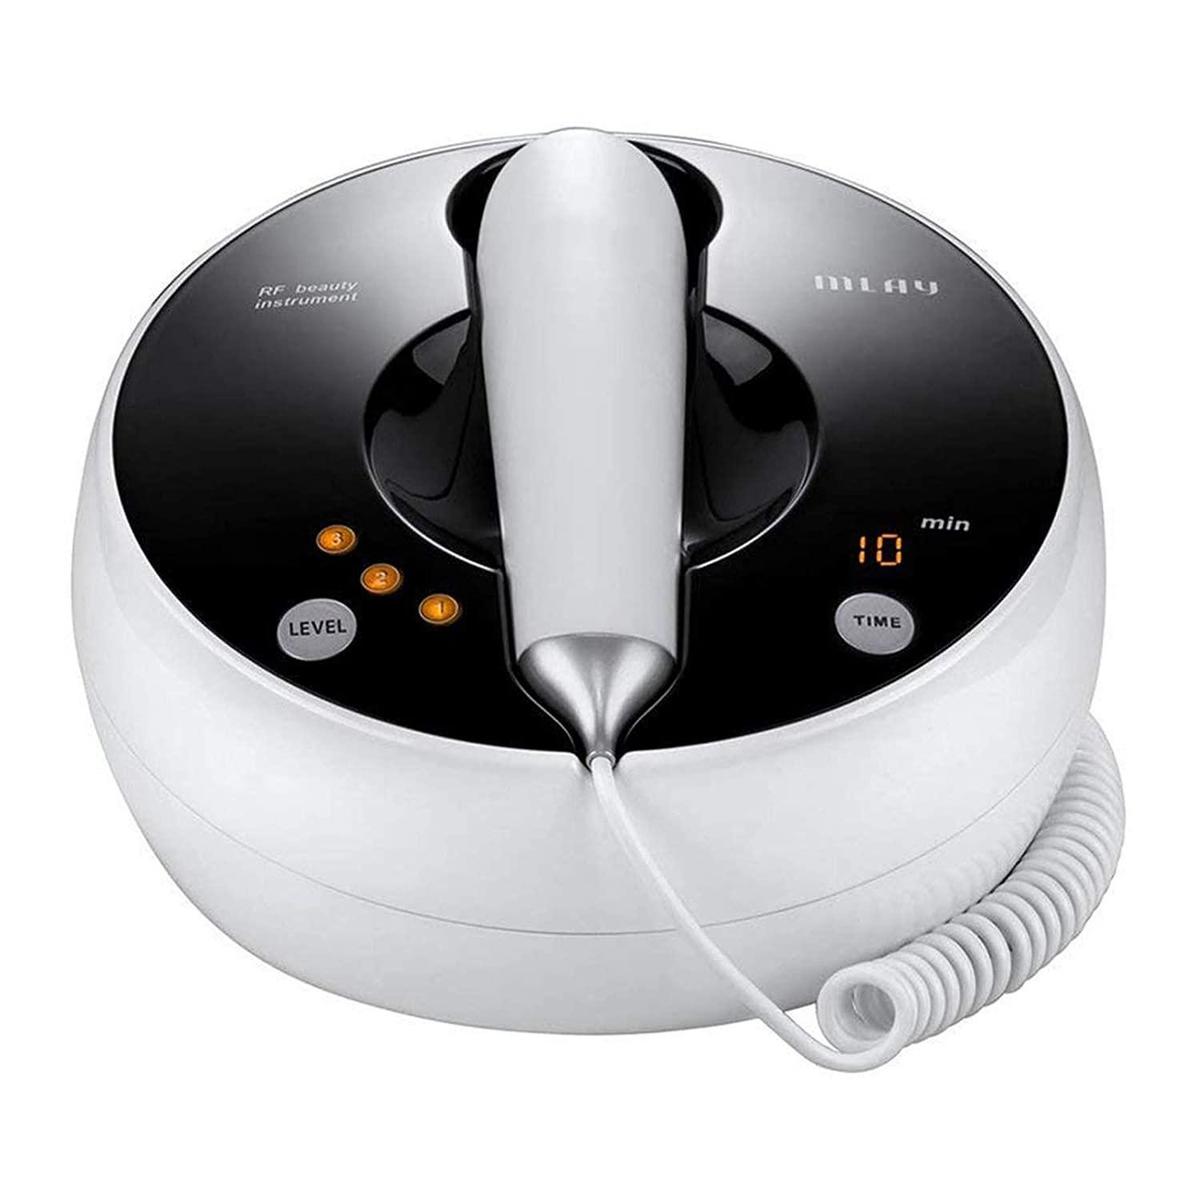 MLAY RF Radio Frequency Facial And Body Skin Tightening Machine - Professional Home RF Lifting Skin